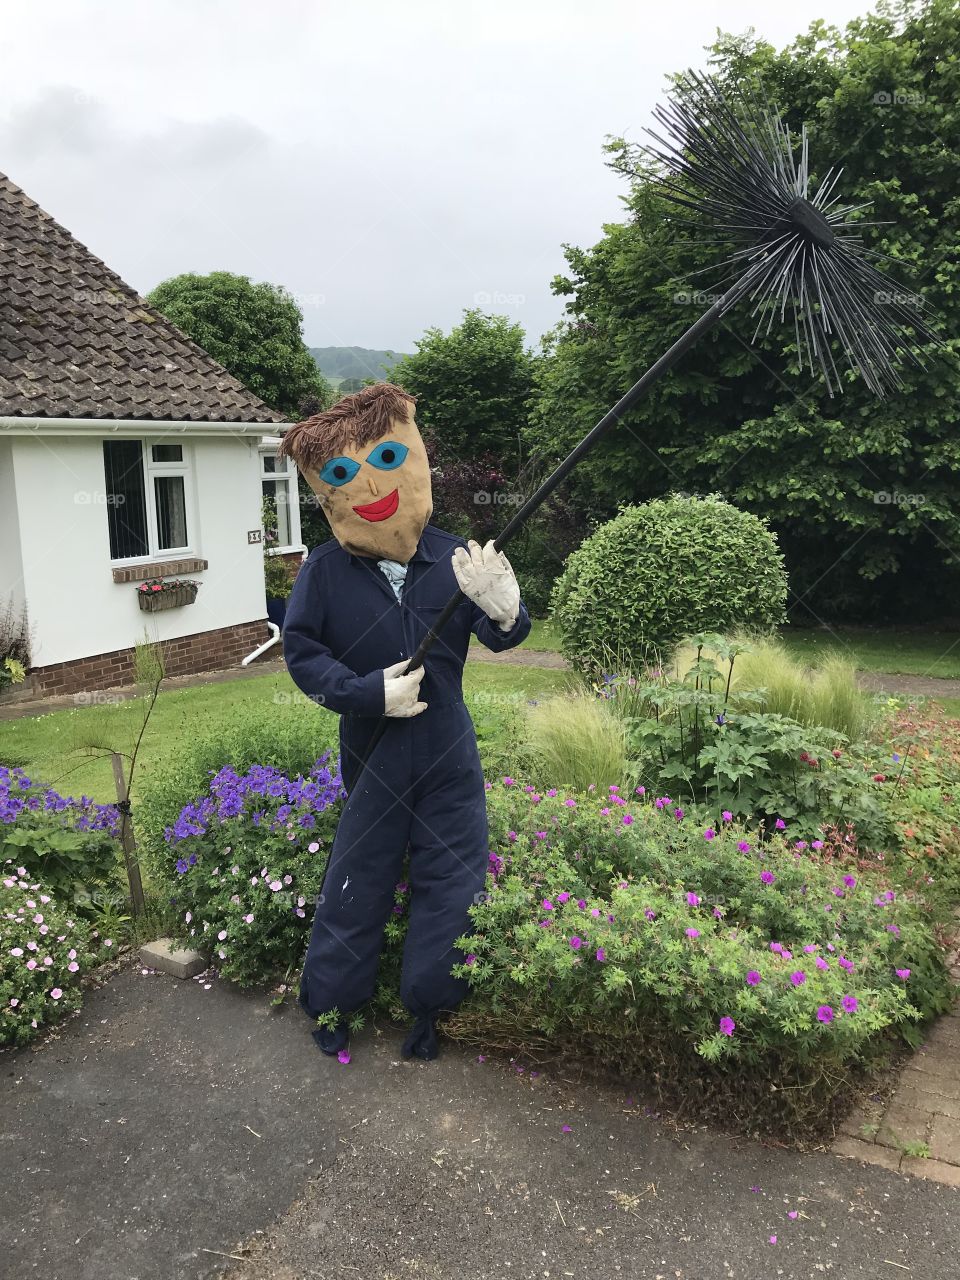 I am loving this “scarecrow” festival in Devon the results are amazing, here l give a warm welcome to Mr chimney sweep, doesn’t he look fab.